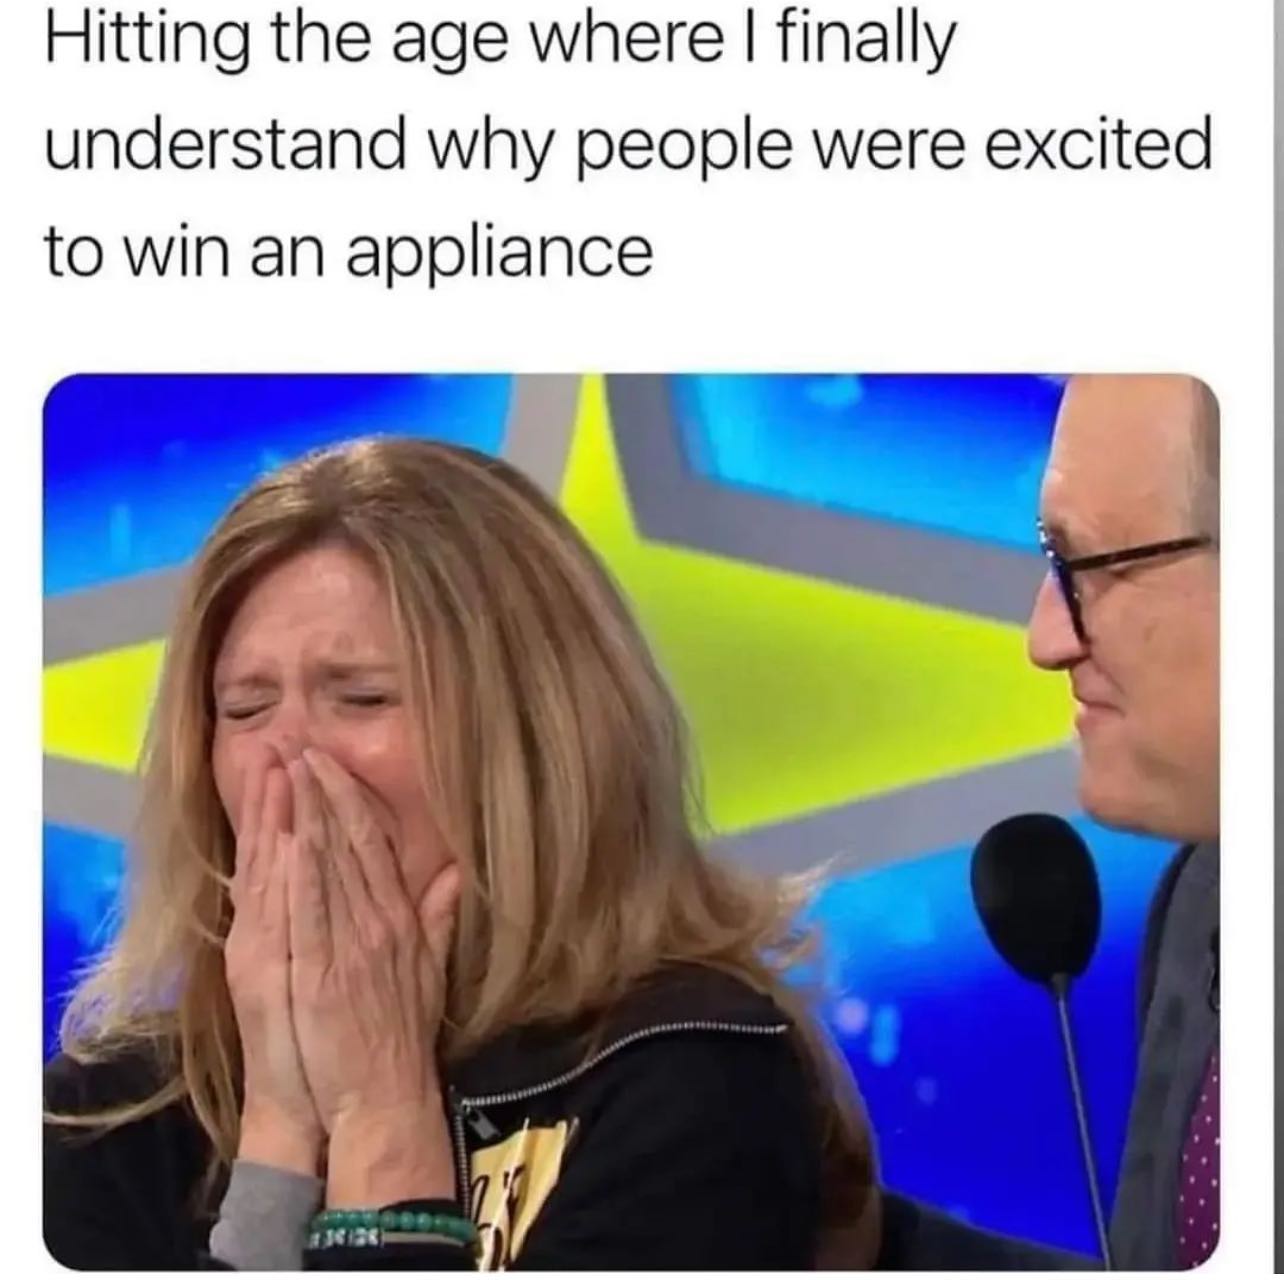 image of a woman crying on a game show captioned "hitting the age where I finally understand why people were excited to win an appliance"